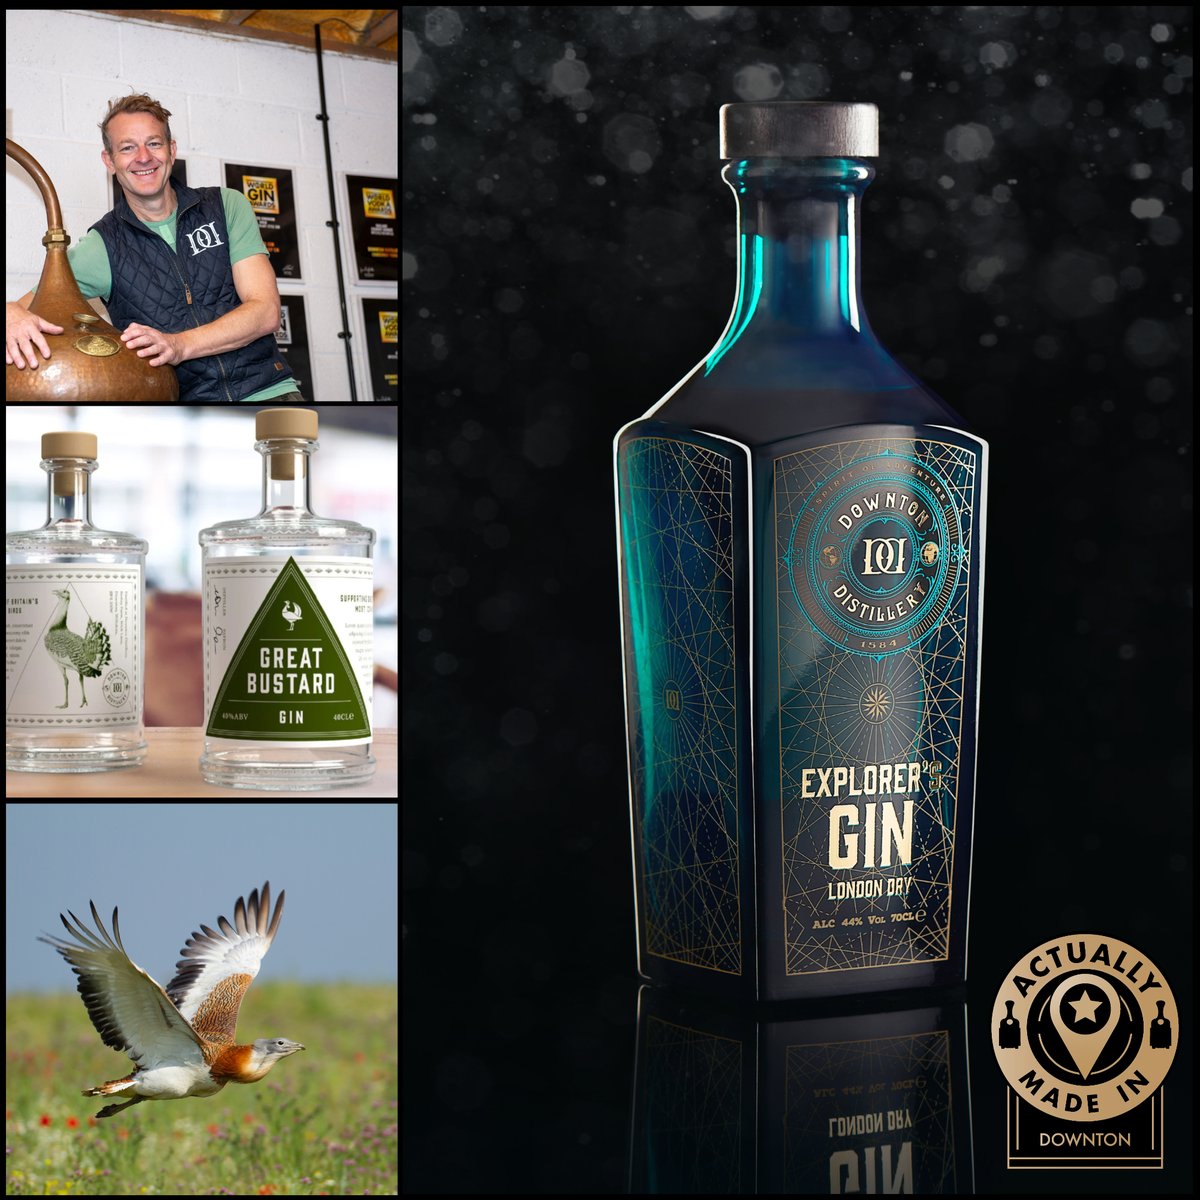 Not all artisan & craft gins are alike & not all distilleries are alike. We are proud to join the #ActuallyMadeIn initiative alongside Manchester Gin, Tarquin’s Gin & Brighton Gin bringing transparency back to spirits. #ActuallyMadeIn #Salisbury #Gin #Wiltshire